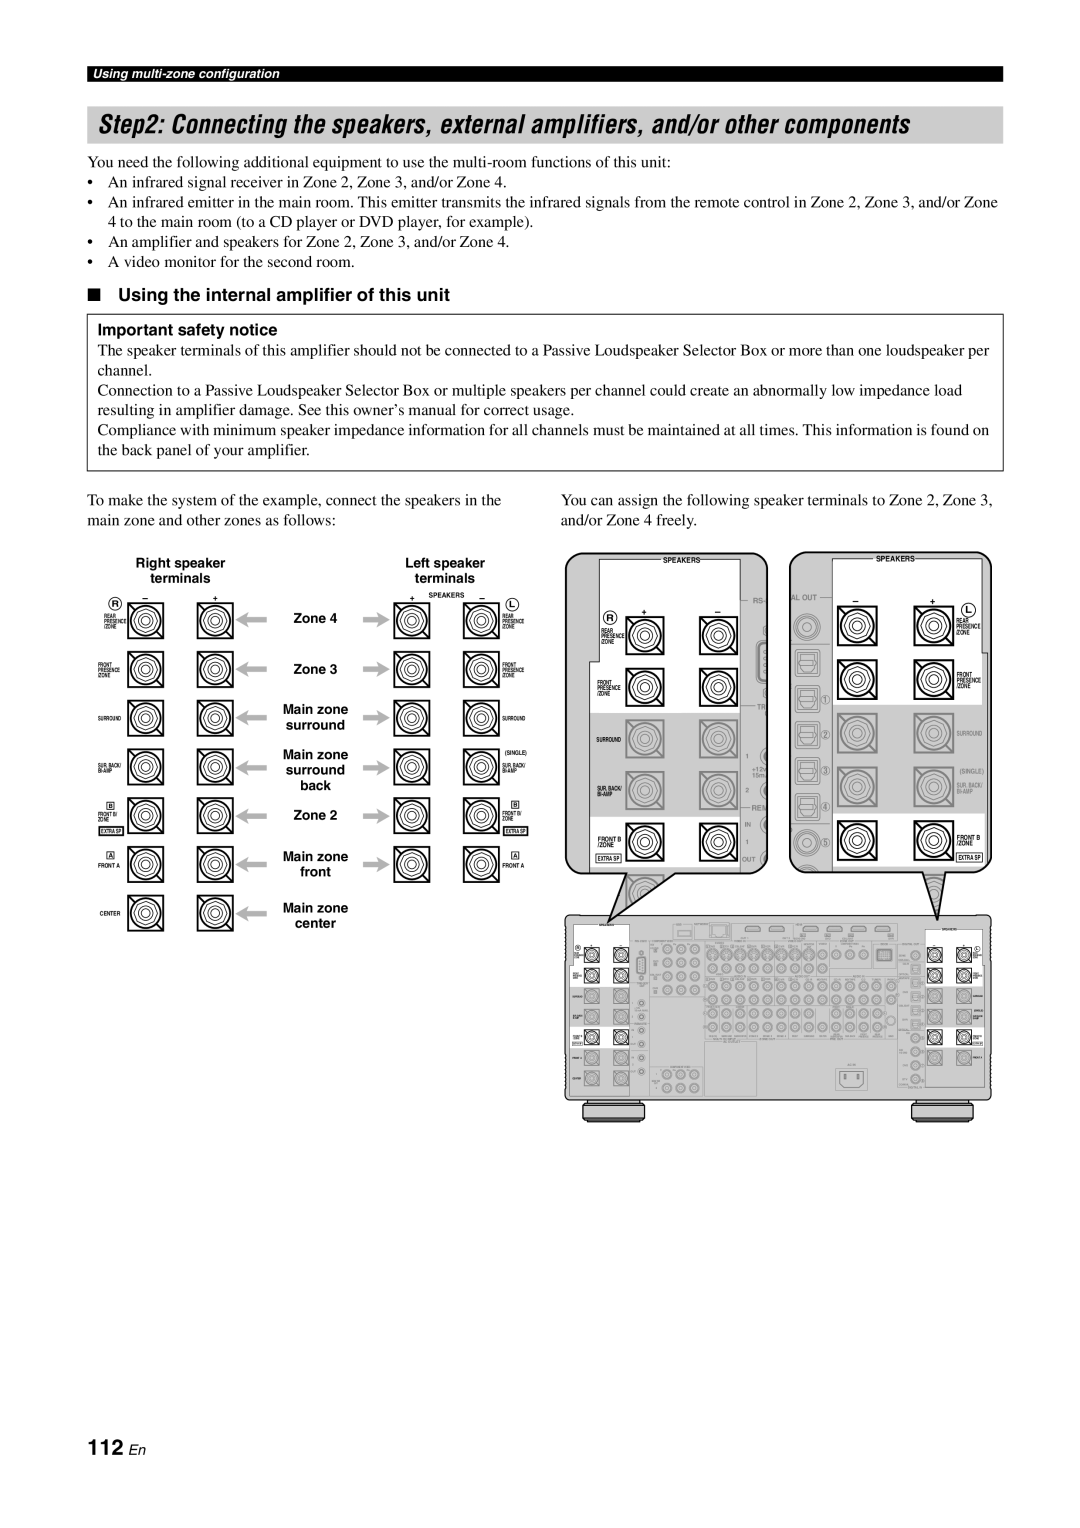 Yamaha DSP-Z11 owner manual 112 En, Using the internal amplifier of this unit 